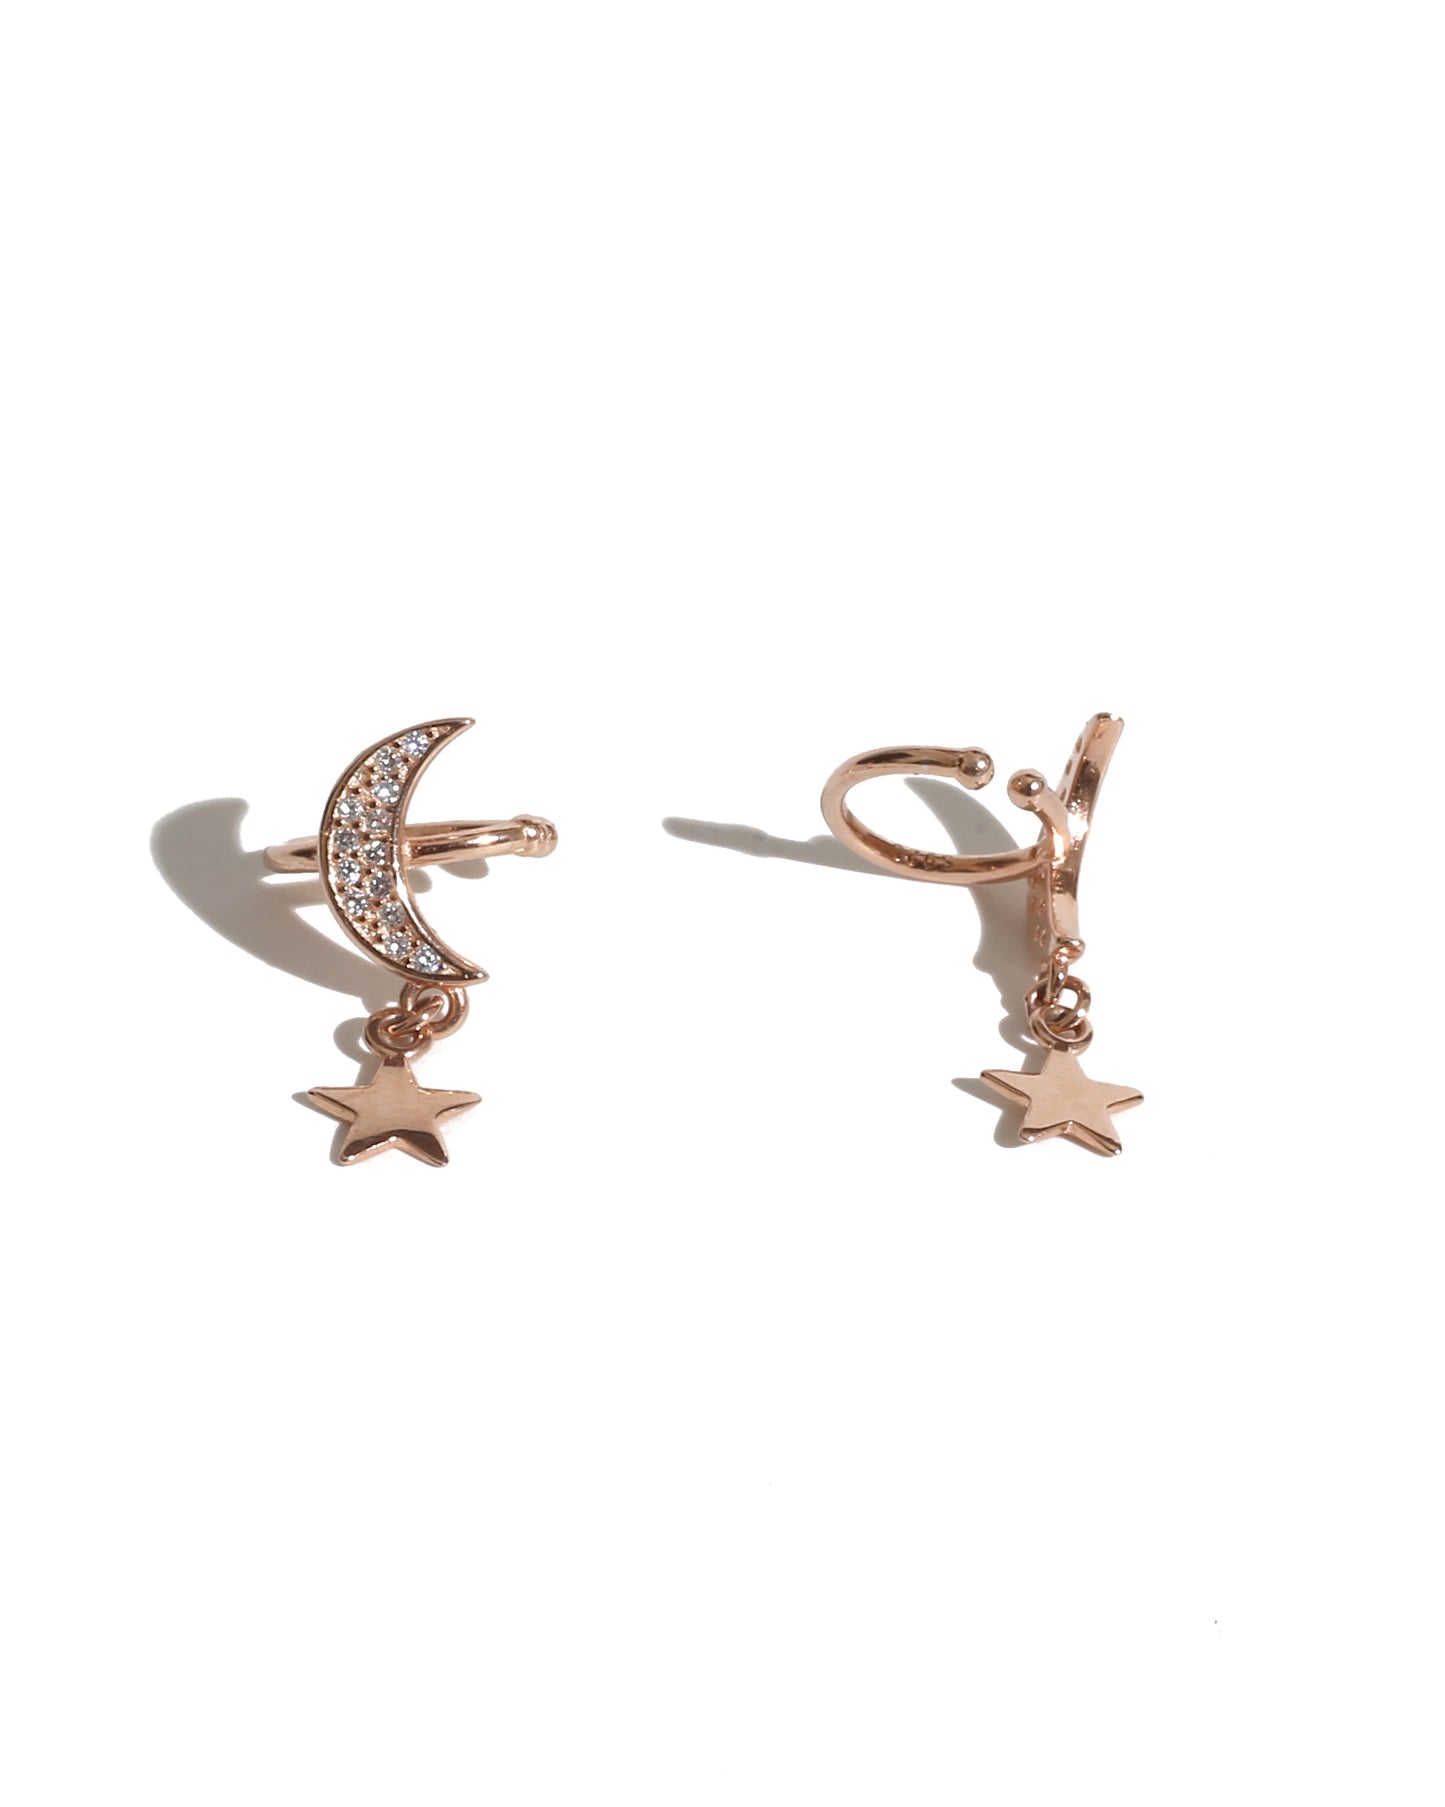 Moon and Star Shaped 925 Sterling Silver Non-Pierced Ear Cuff Earrings in captivating rose gold